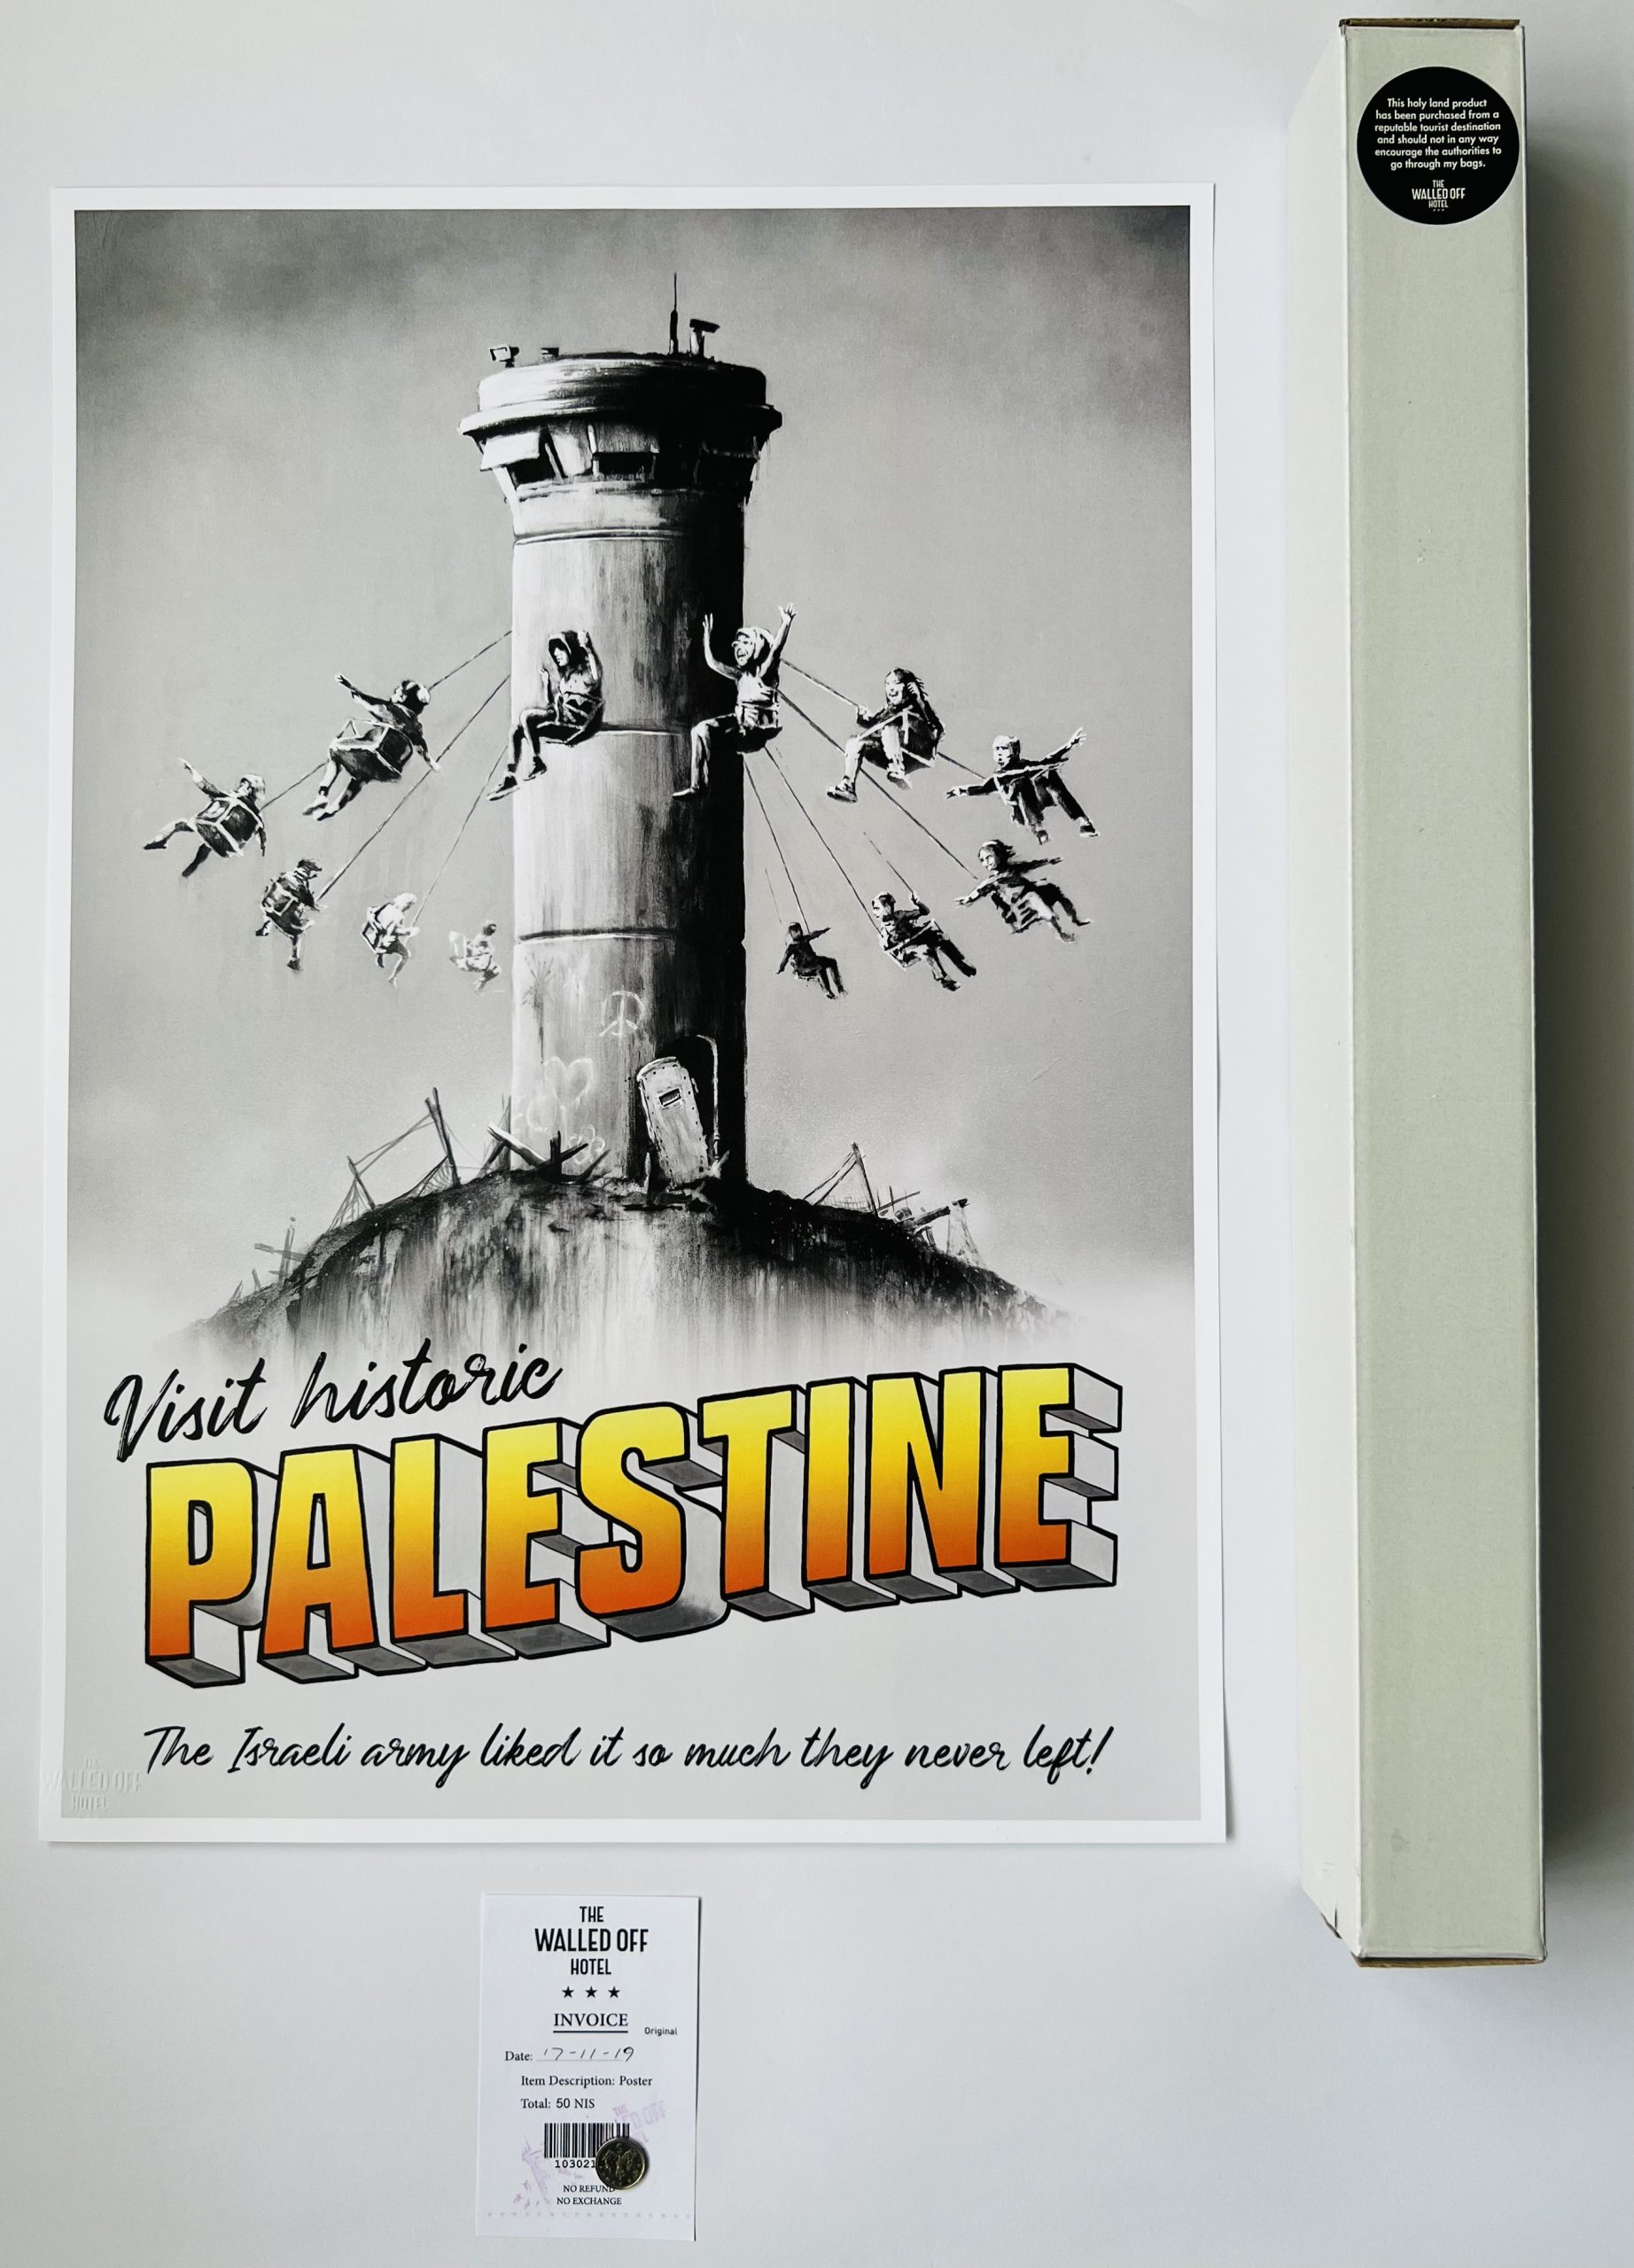 banksy visit historic palestine poster receipt and box